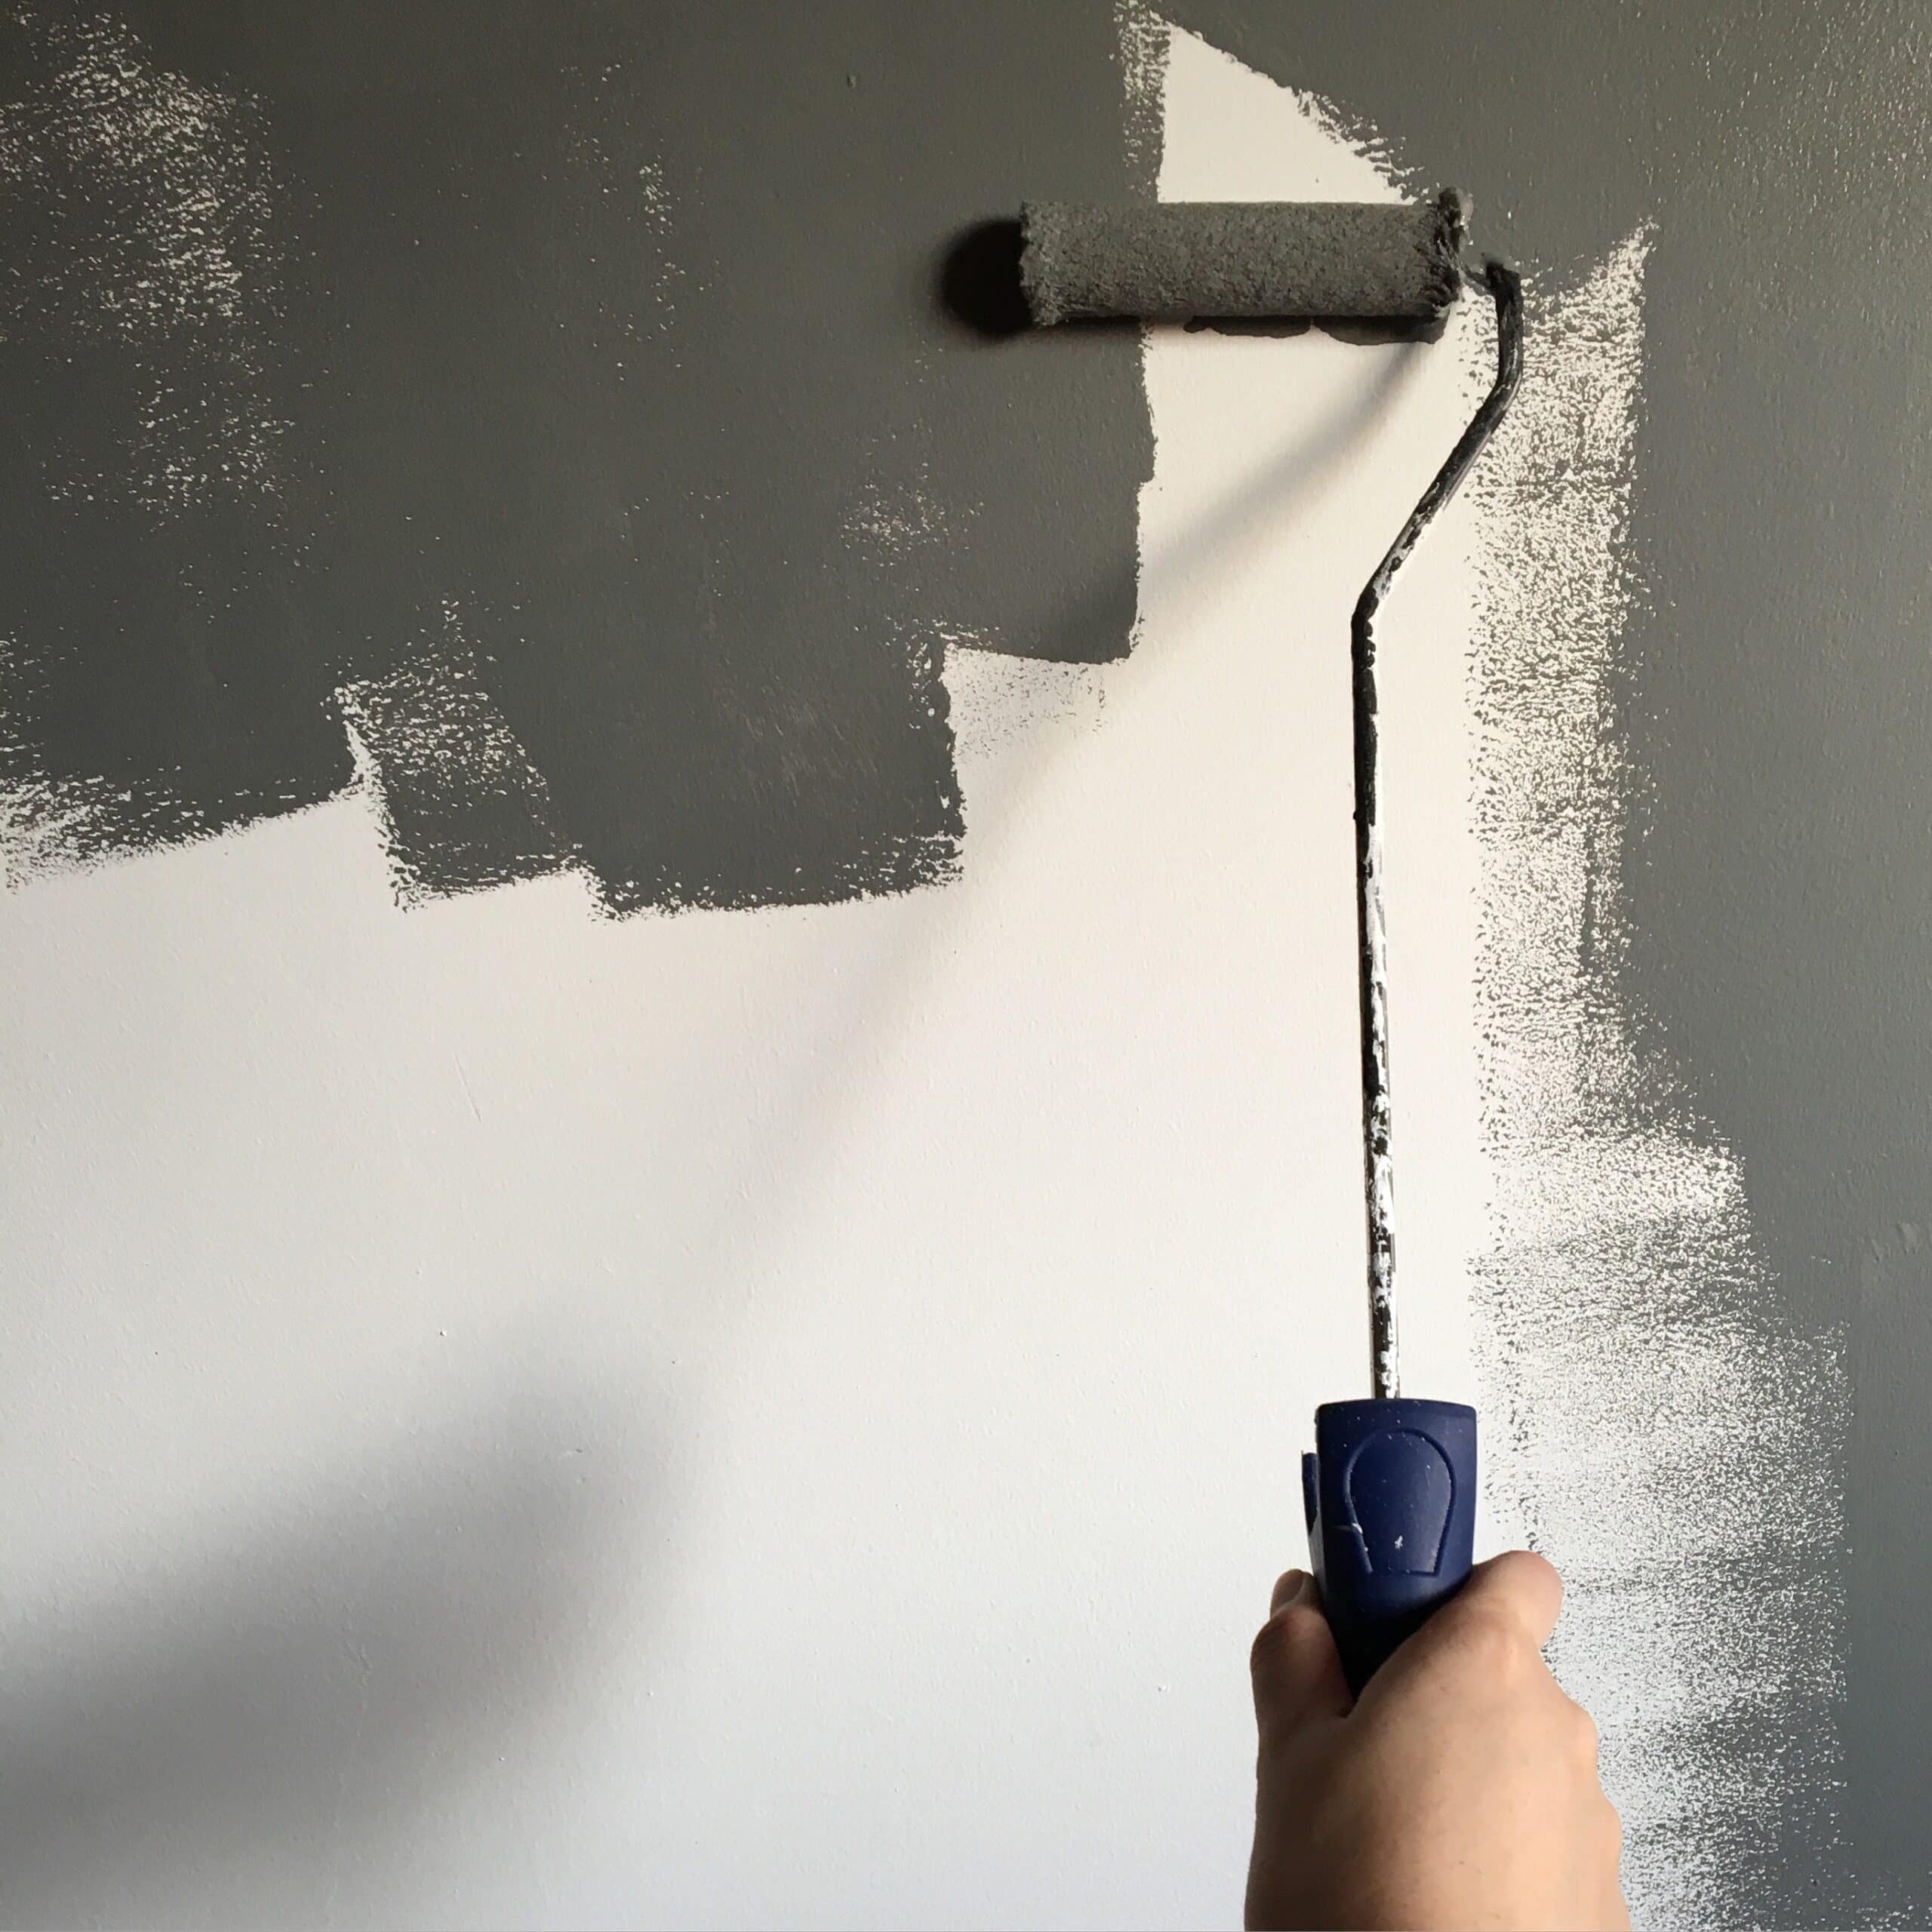 A Guide on Painting Walls in Rainy Weather